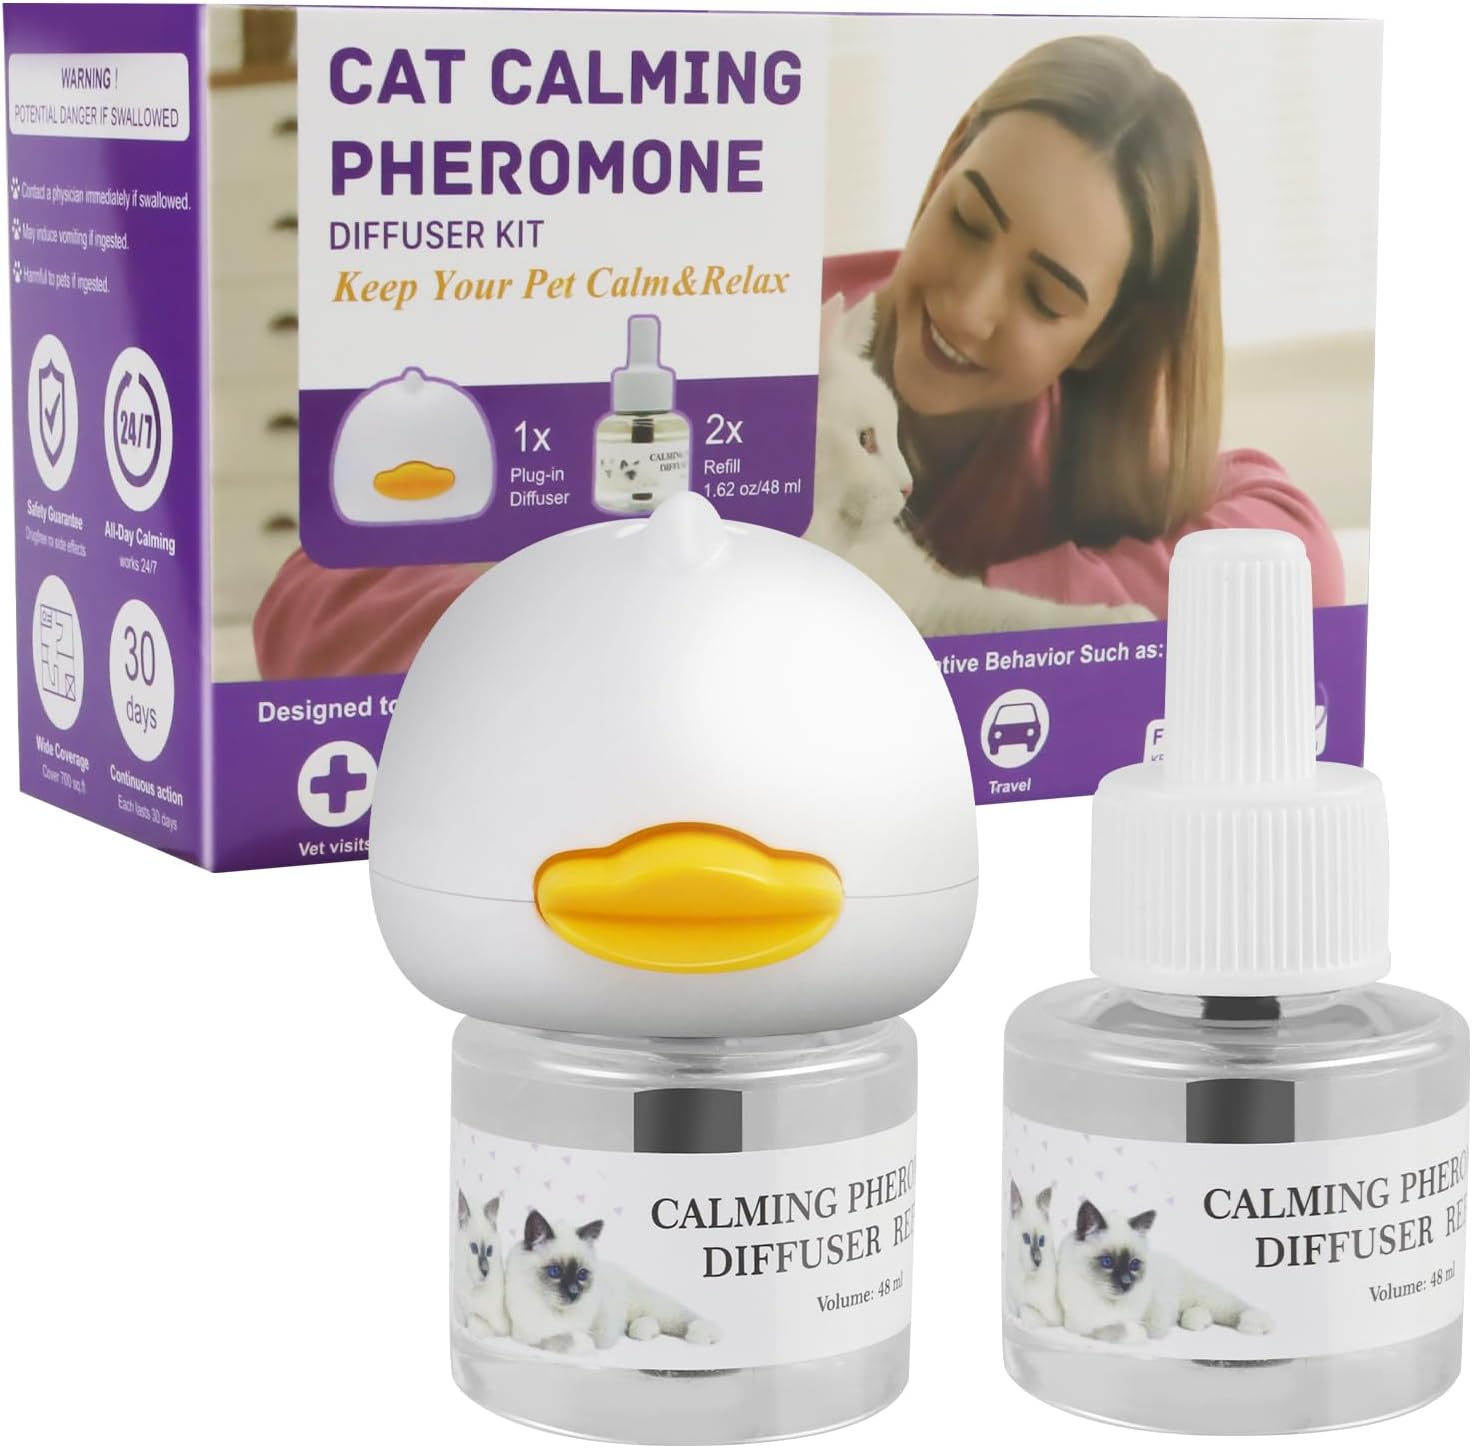 Cat Calming Diffuser 60 Day Starter-Kit Cat Calming Diffuser Effectively Relieve Anxiety Stress Reduce Fighting and Scratching Calm Relaxing 48ml /Bottle Fits All Cats